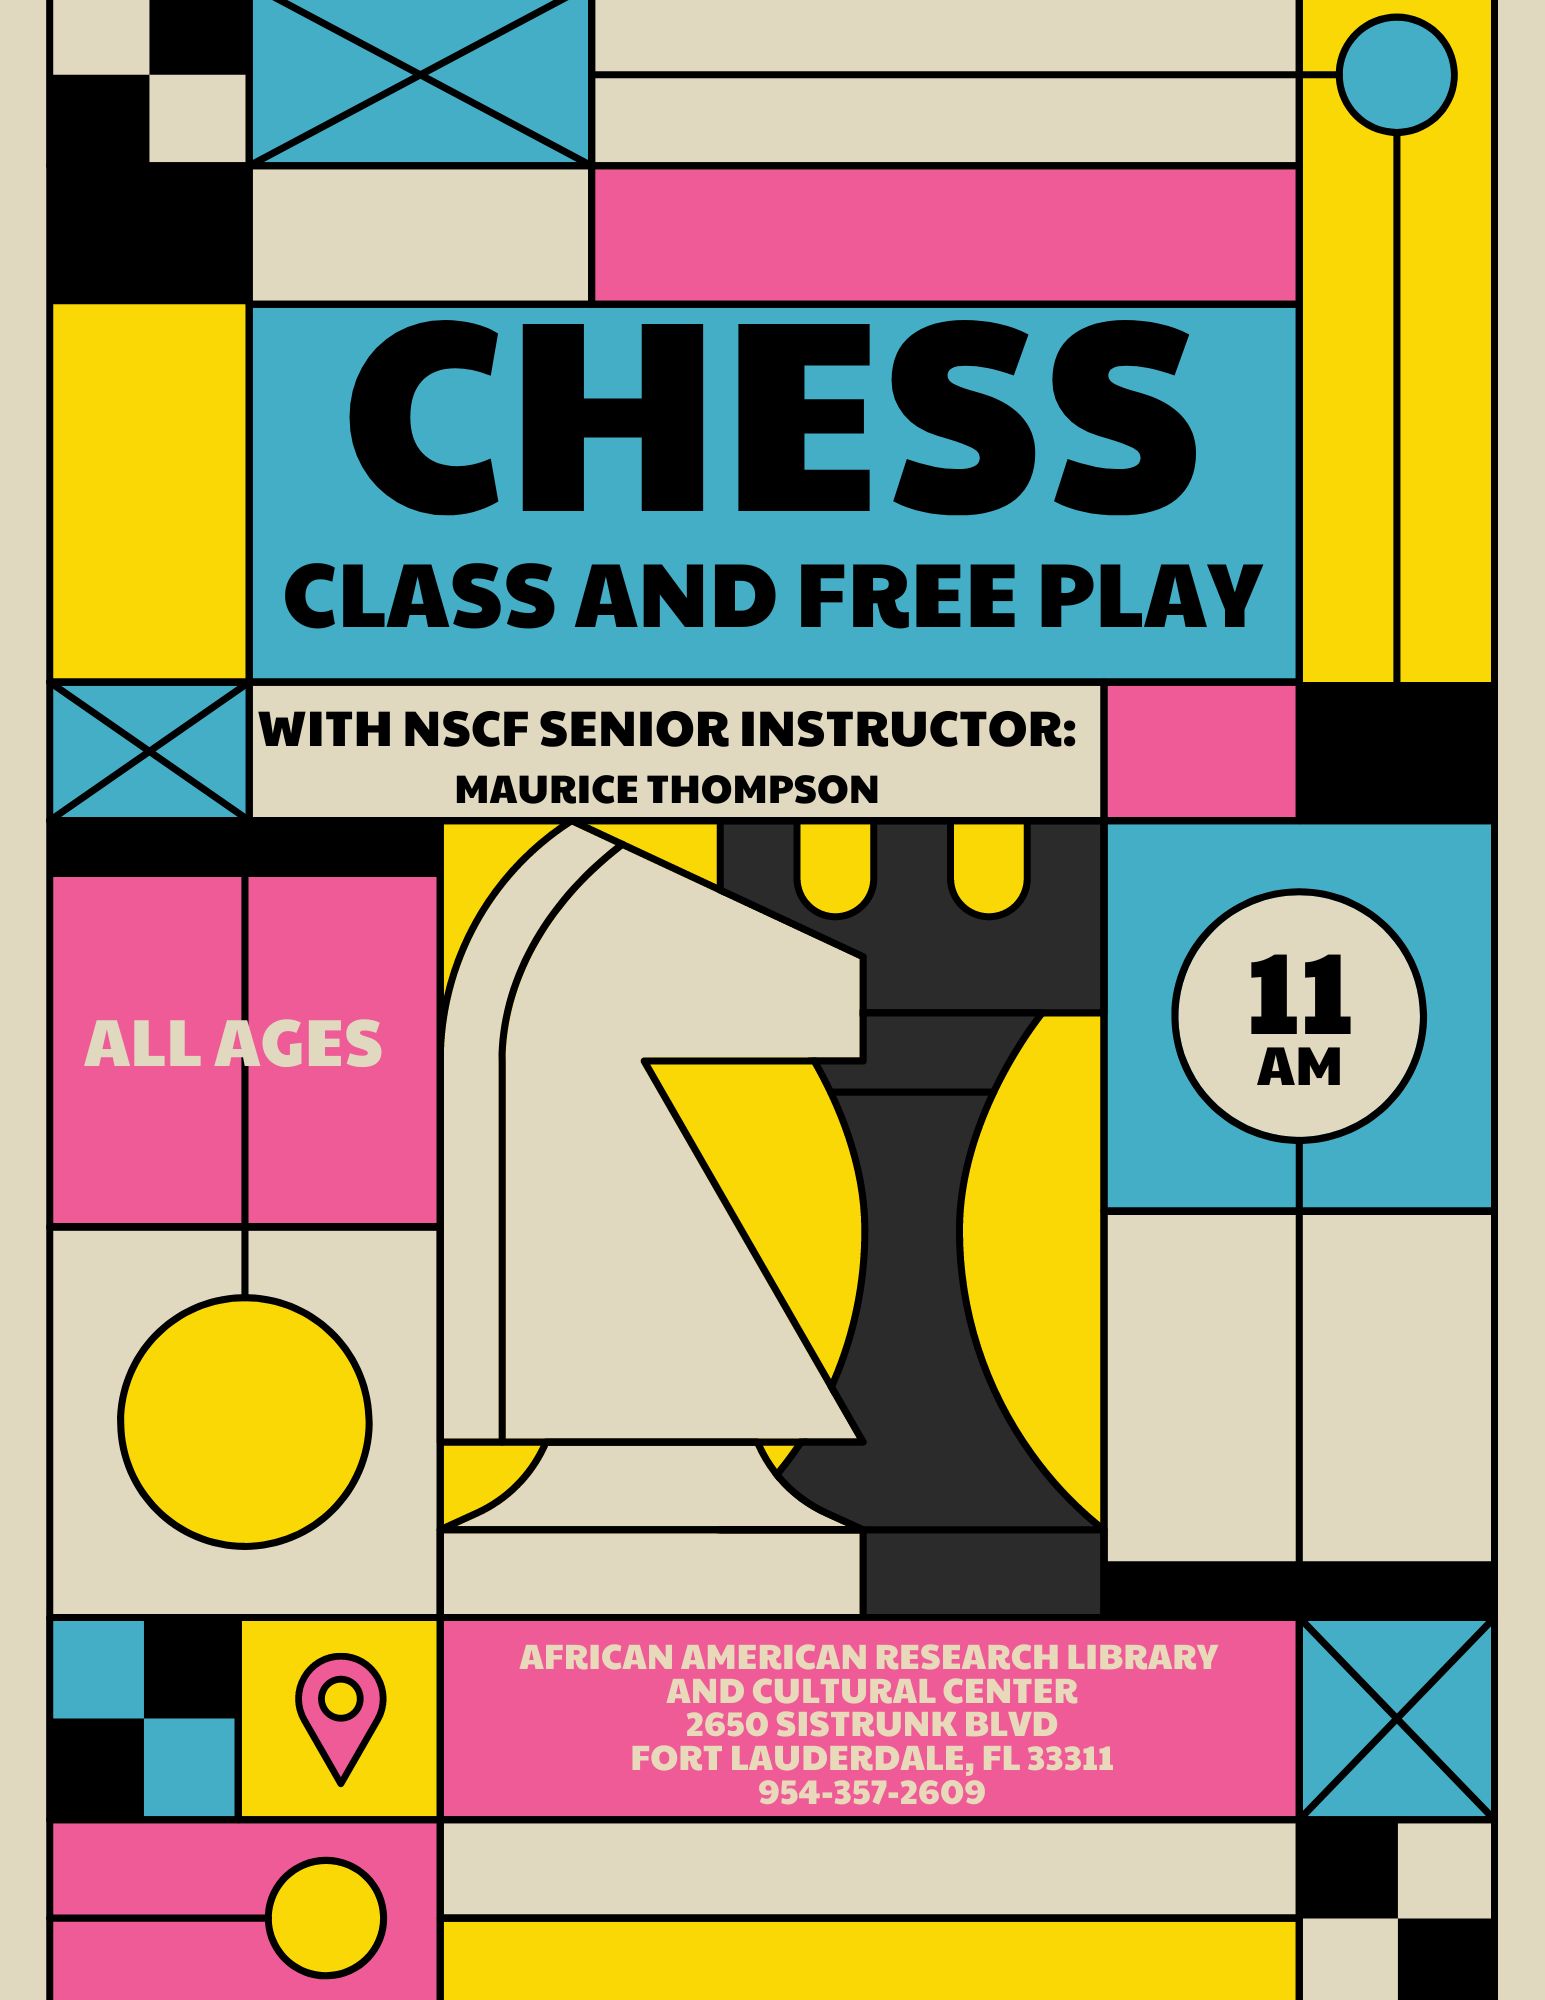 Chess Class and Free Play Flyer